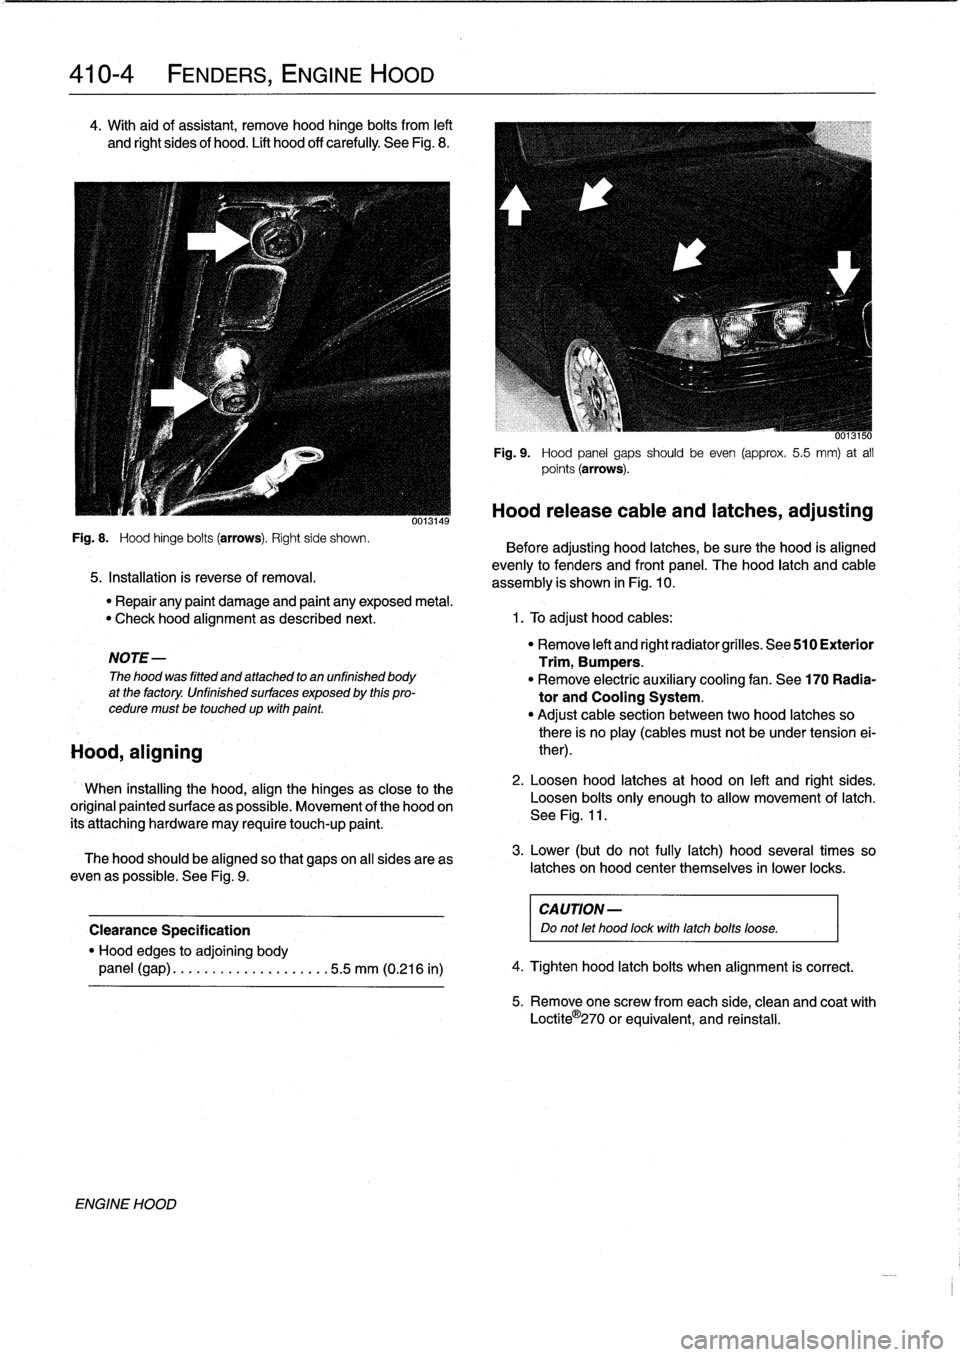 BMW 318i 1997 E36 Workshop Manual 
410-4

	

FENDERS,
ENGINE
HOOD

4
.
With
aid
of
assistant,
remove
hood
hinge
bolts
from
left

and
Rght
sides
of
hood
.
Lift
hood
off
carefully
See
Fig
.
8
.

Fig
.
8
.

	

Hood
hinge
bolts
(arrows)
.